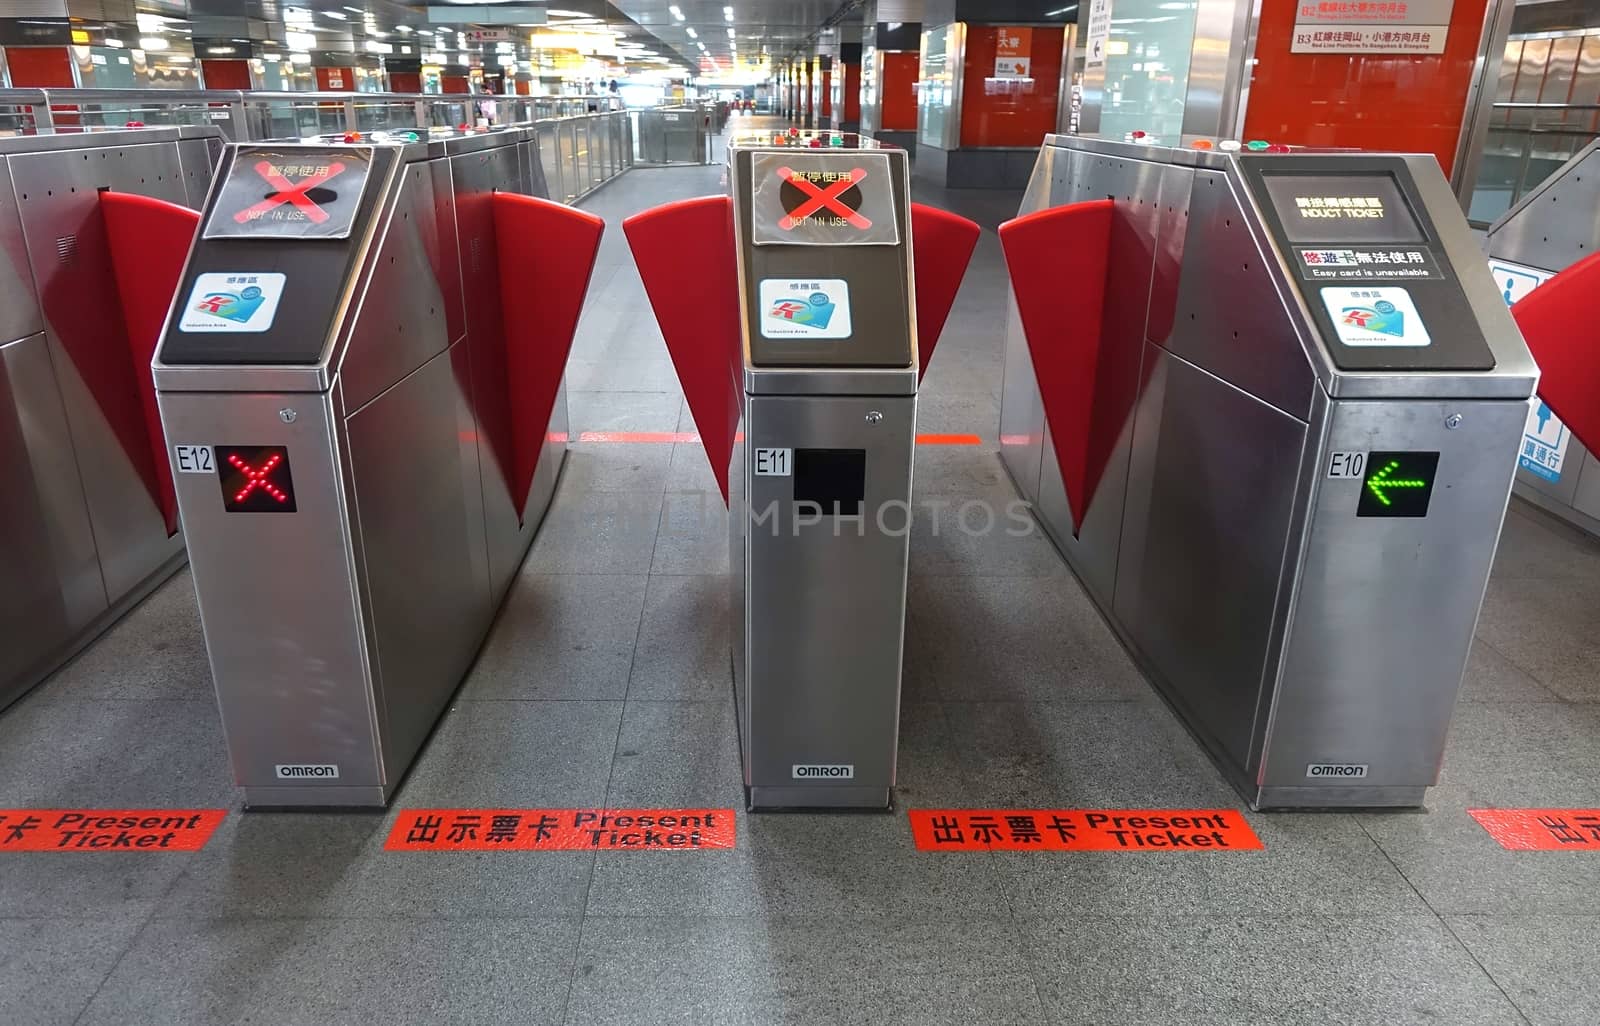 KAOHSIUNG, TAIWAN -- JULY 8, 2014: Automatic ticket reading machines at the Kaohsiung subway system